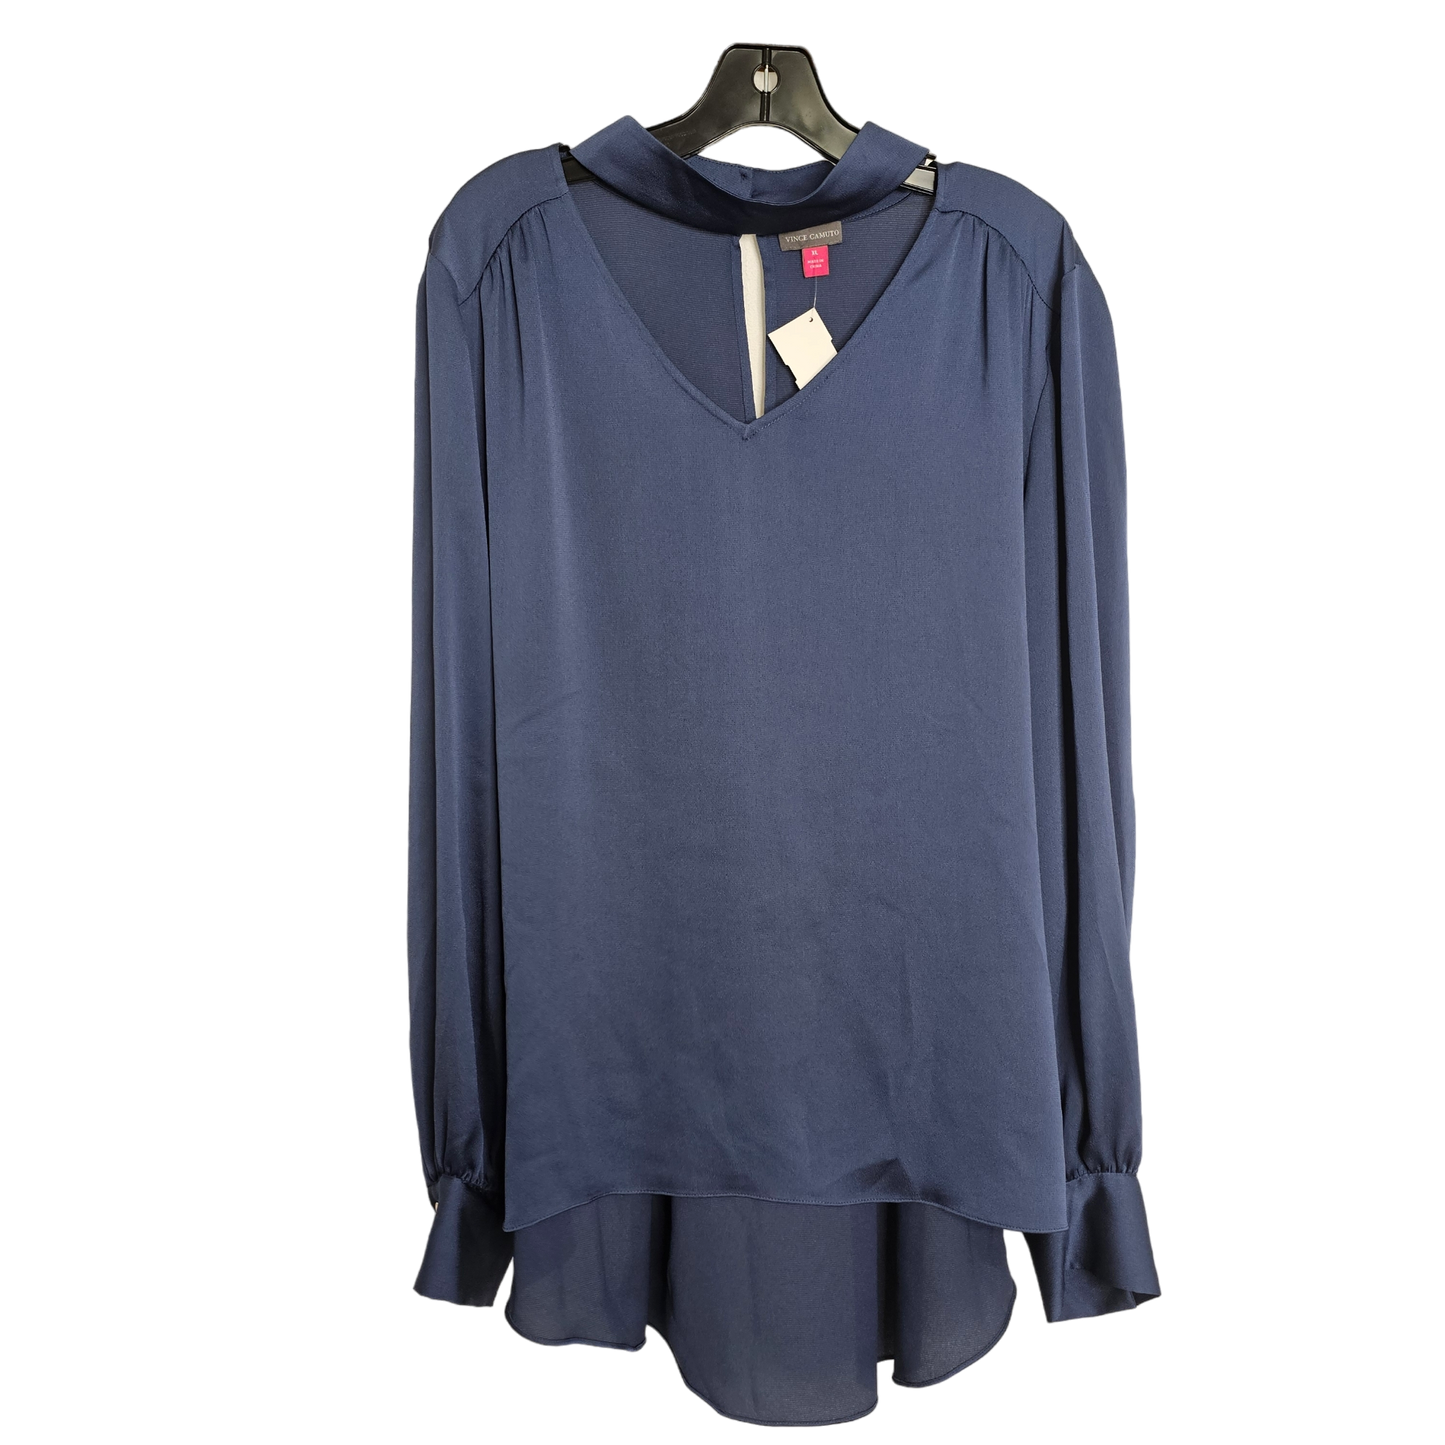 Blue Top Long Sleeve Vince Camuto, Size Xl